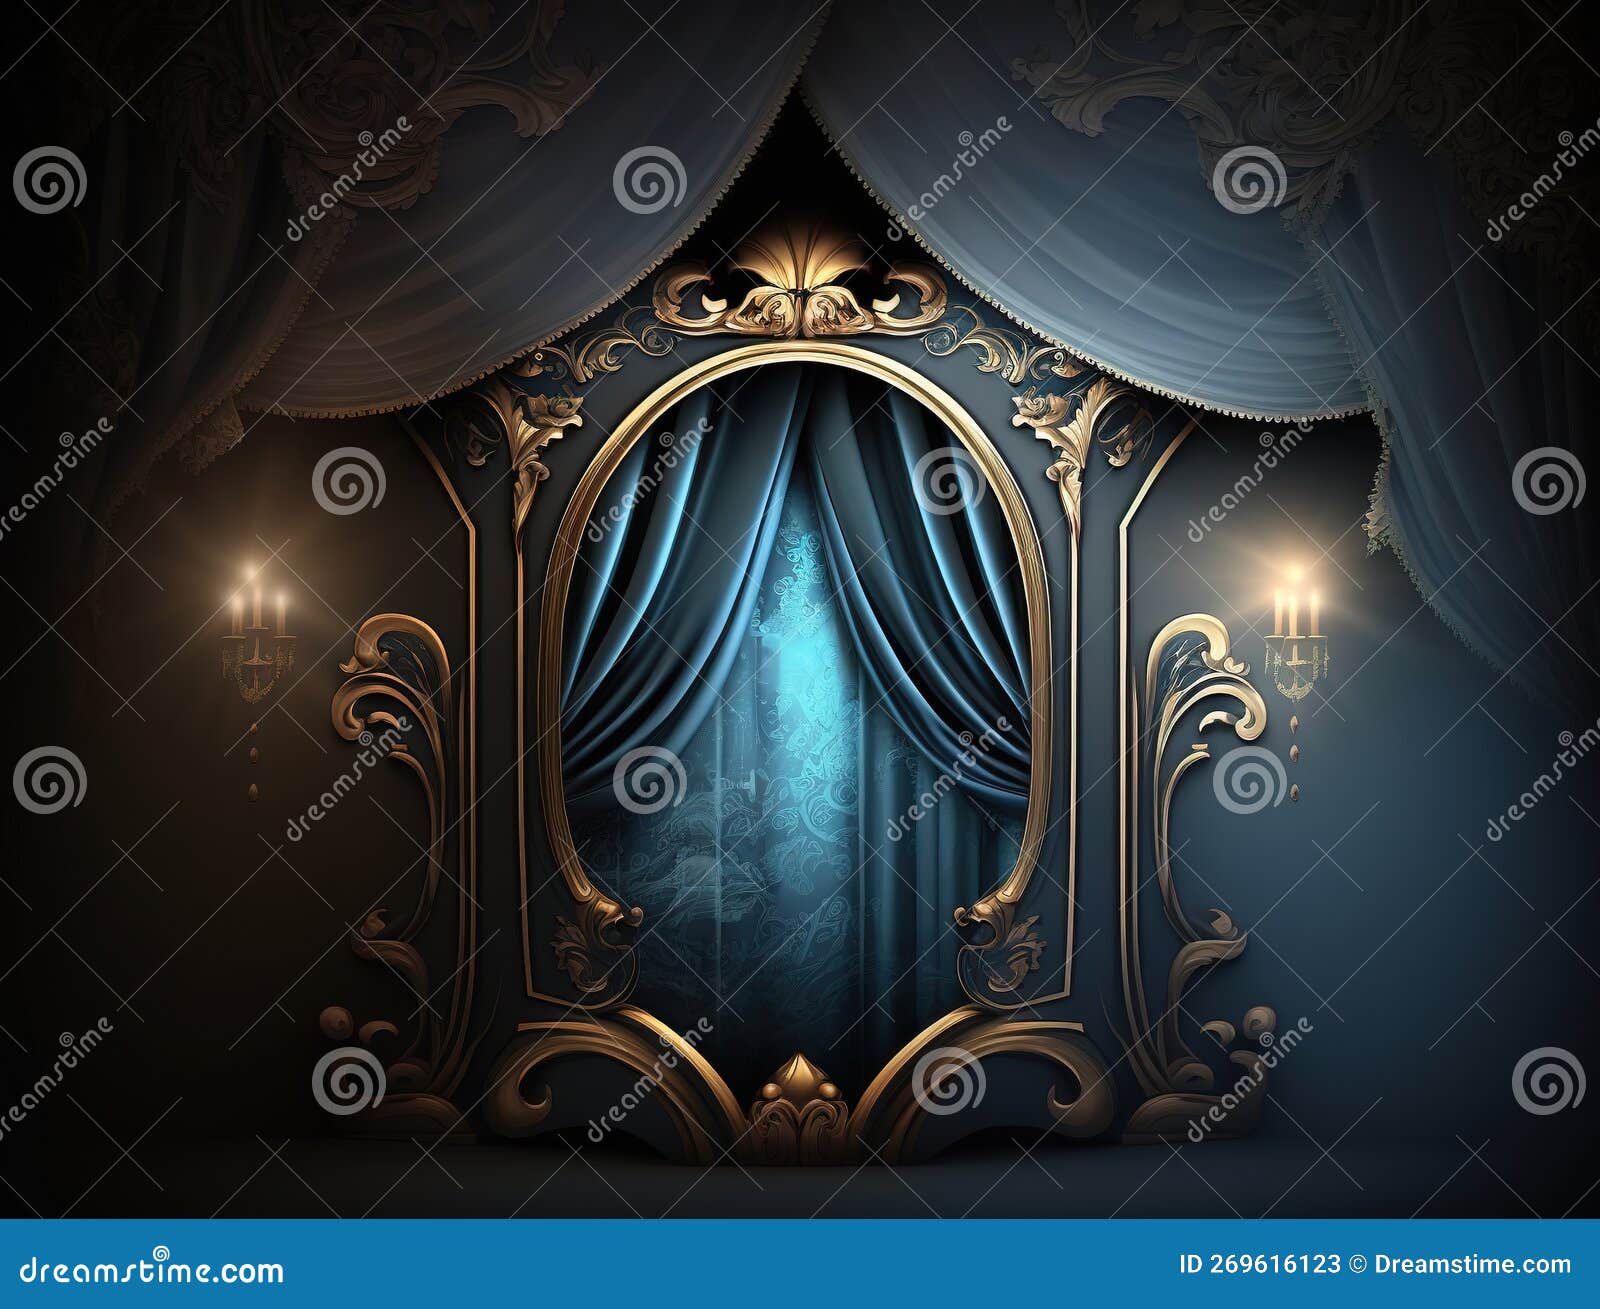 generated ai elegant blue curtain and window background with ornate gold accents for compositing